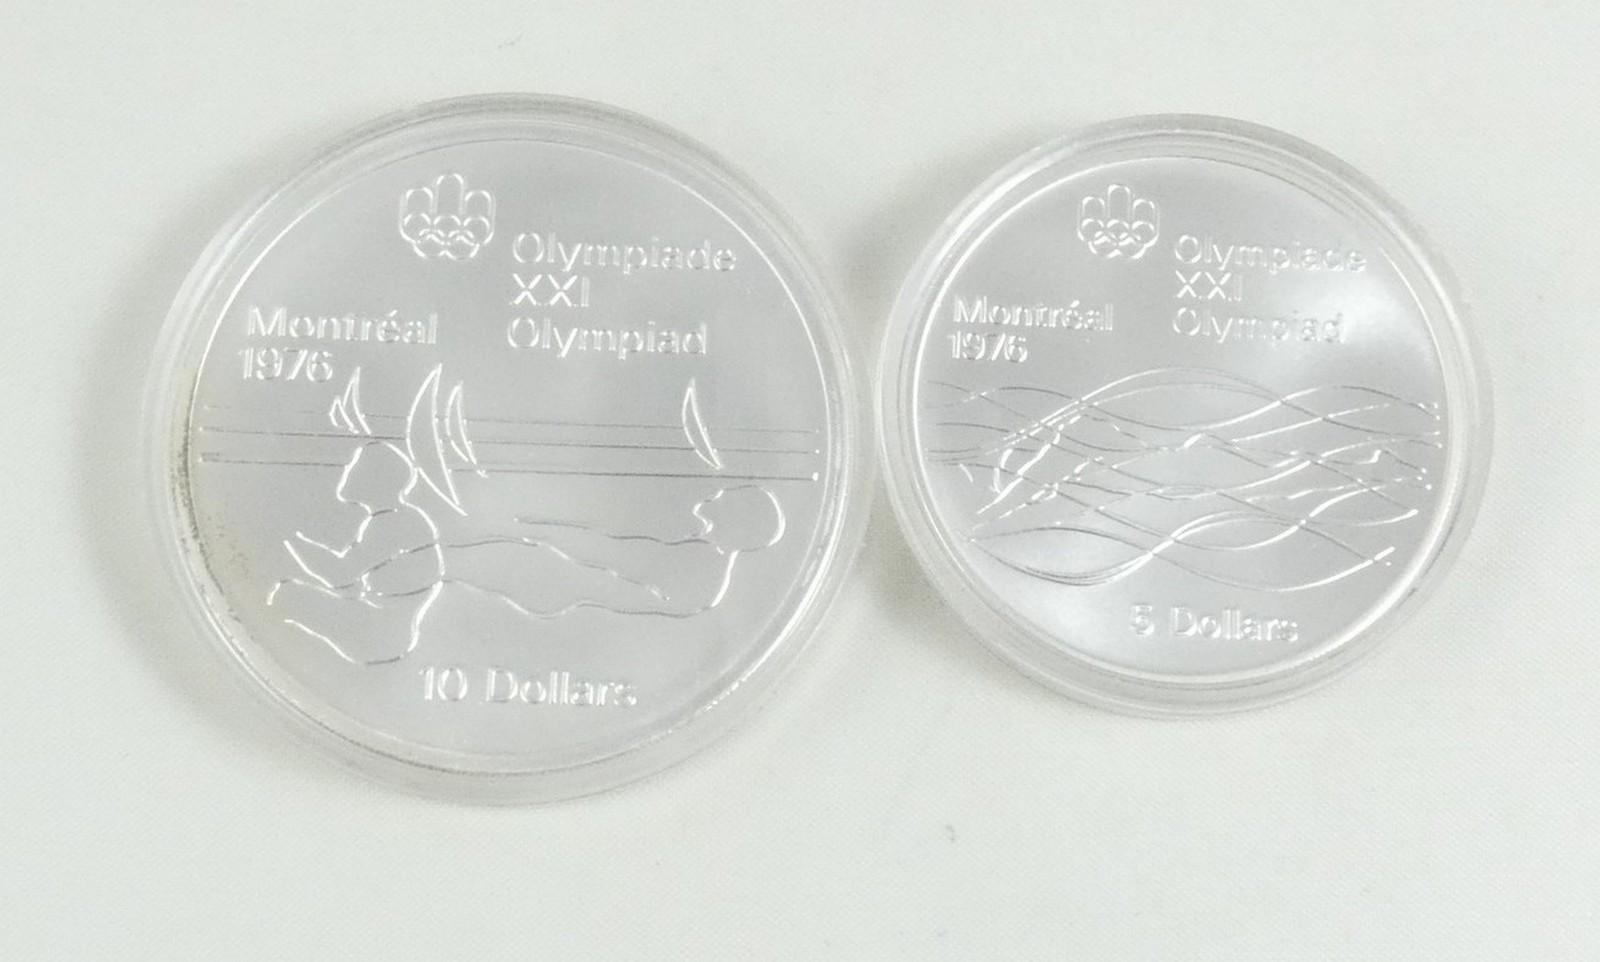 2 CANADIAN OLYMPIC COINS